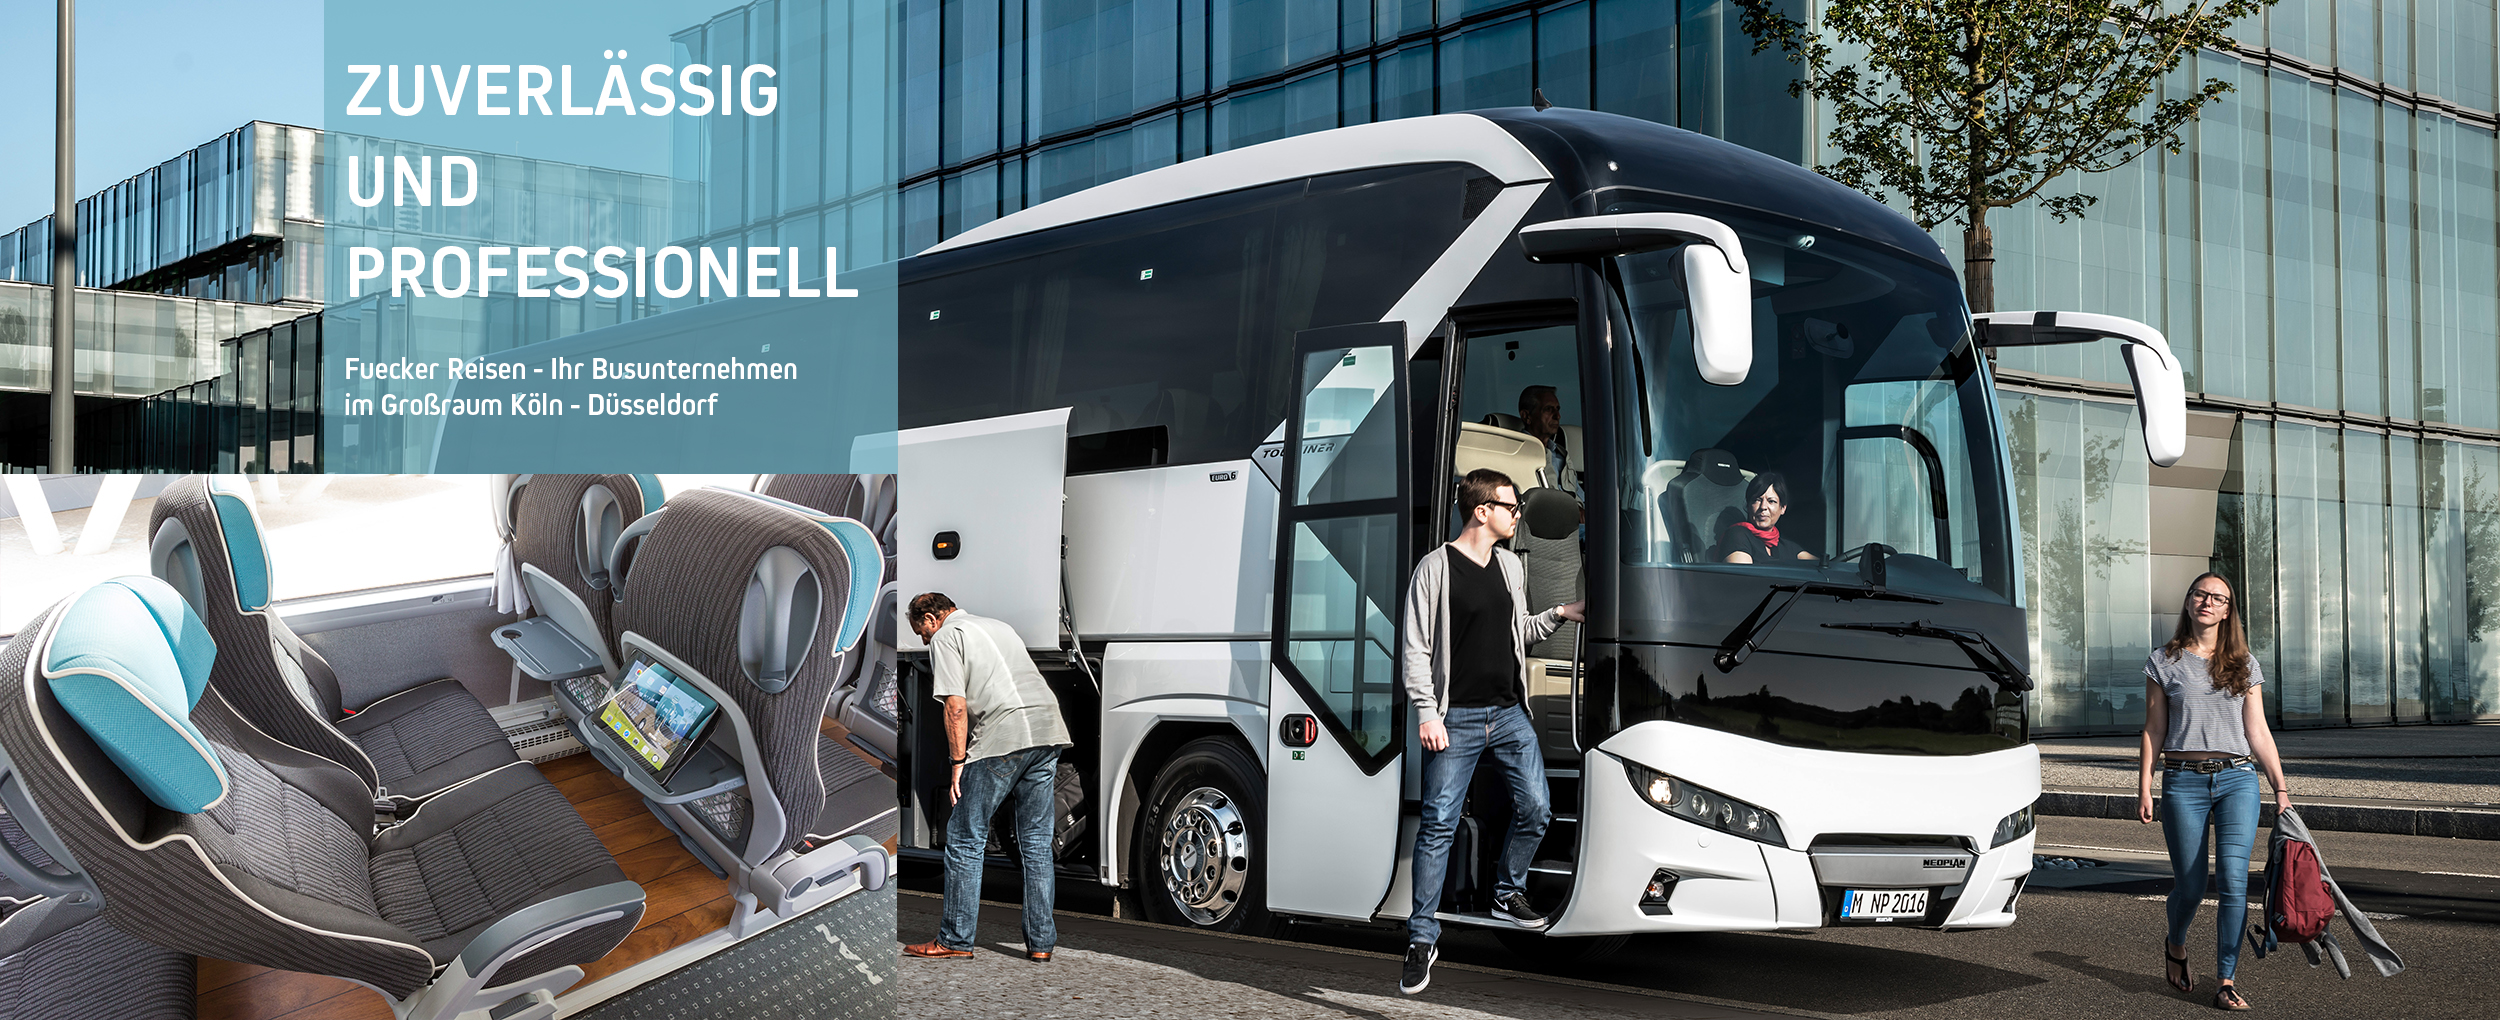 In visual terms the new NEOPLAN Tourliner is clearly a member of the NEOPLAN family.
DE:
Der neue NEOPLAN Tourliner reiht sich optisch klar  in die NEOPLAN-Familie ein.
UK:
In visual terms the new NEOPLAN Tourliner is clearly a member of the NEOPLAN family.